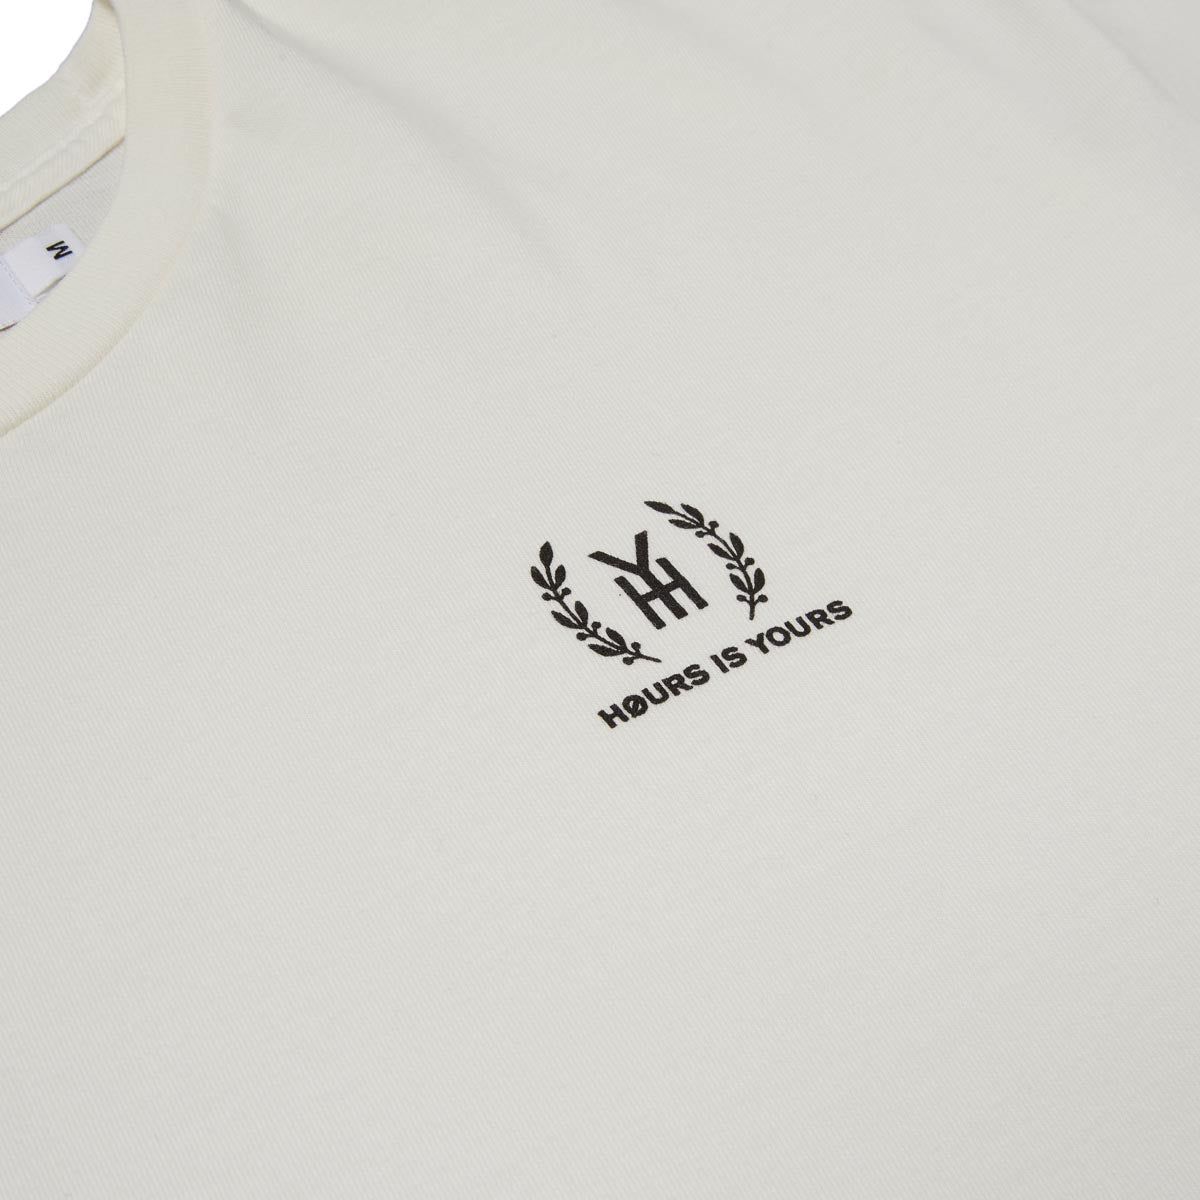 Hours Is Yours Monogram T-Shirt - Vintage White image 2